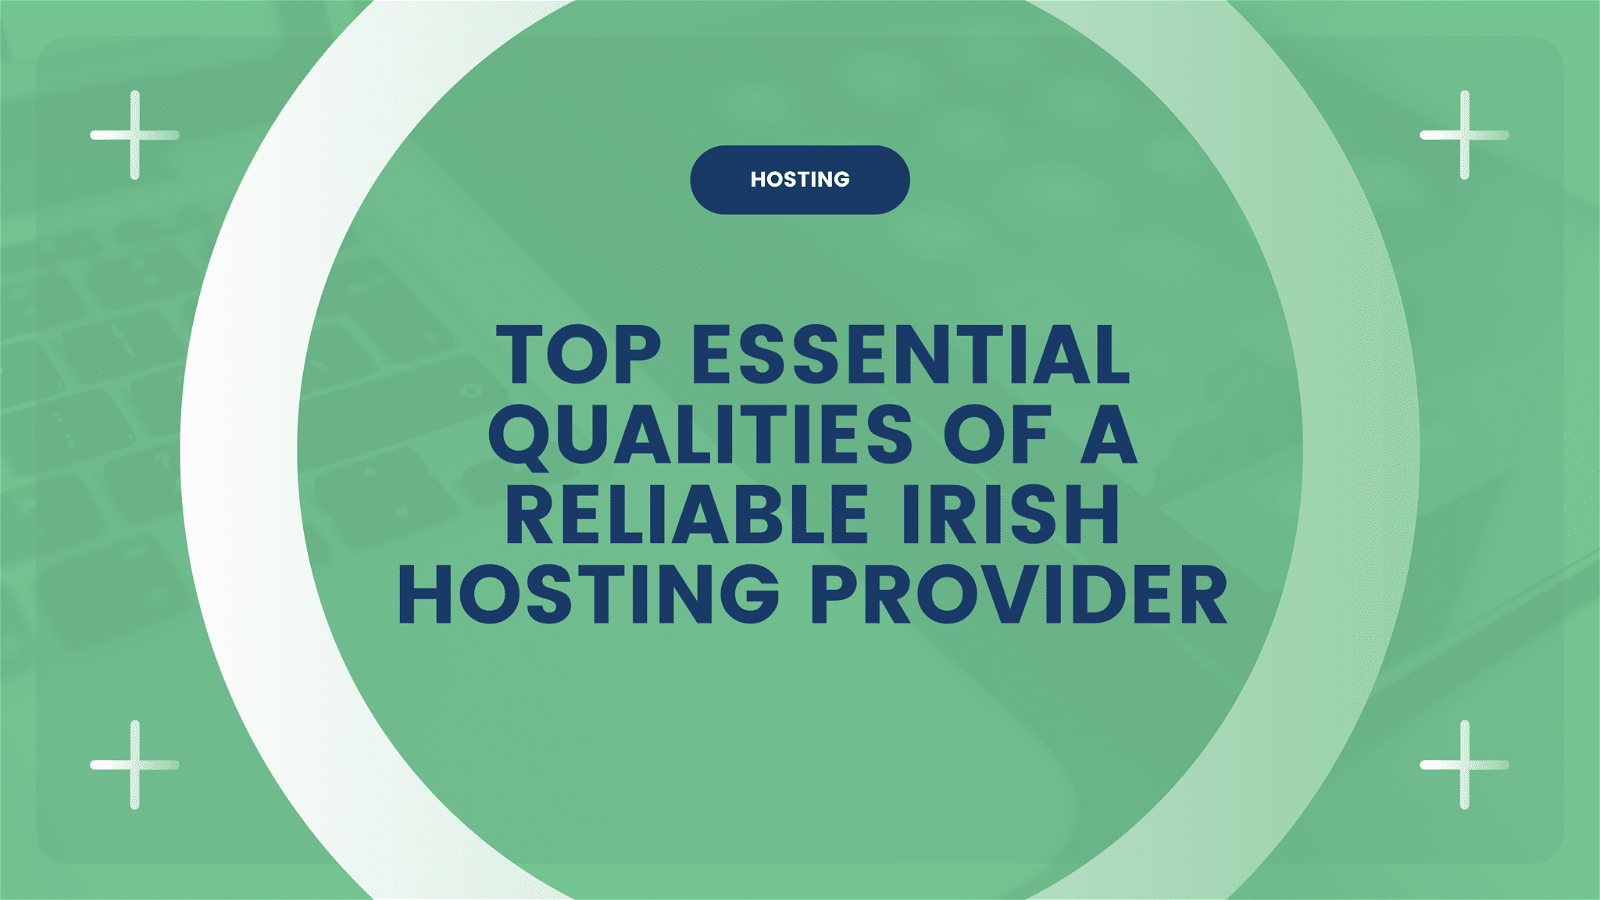 The image is showcasing the essential qualities that a reliable Irish hosting provider should possess.